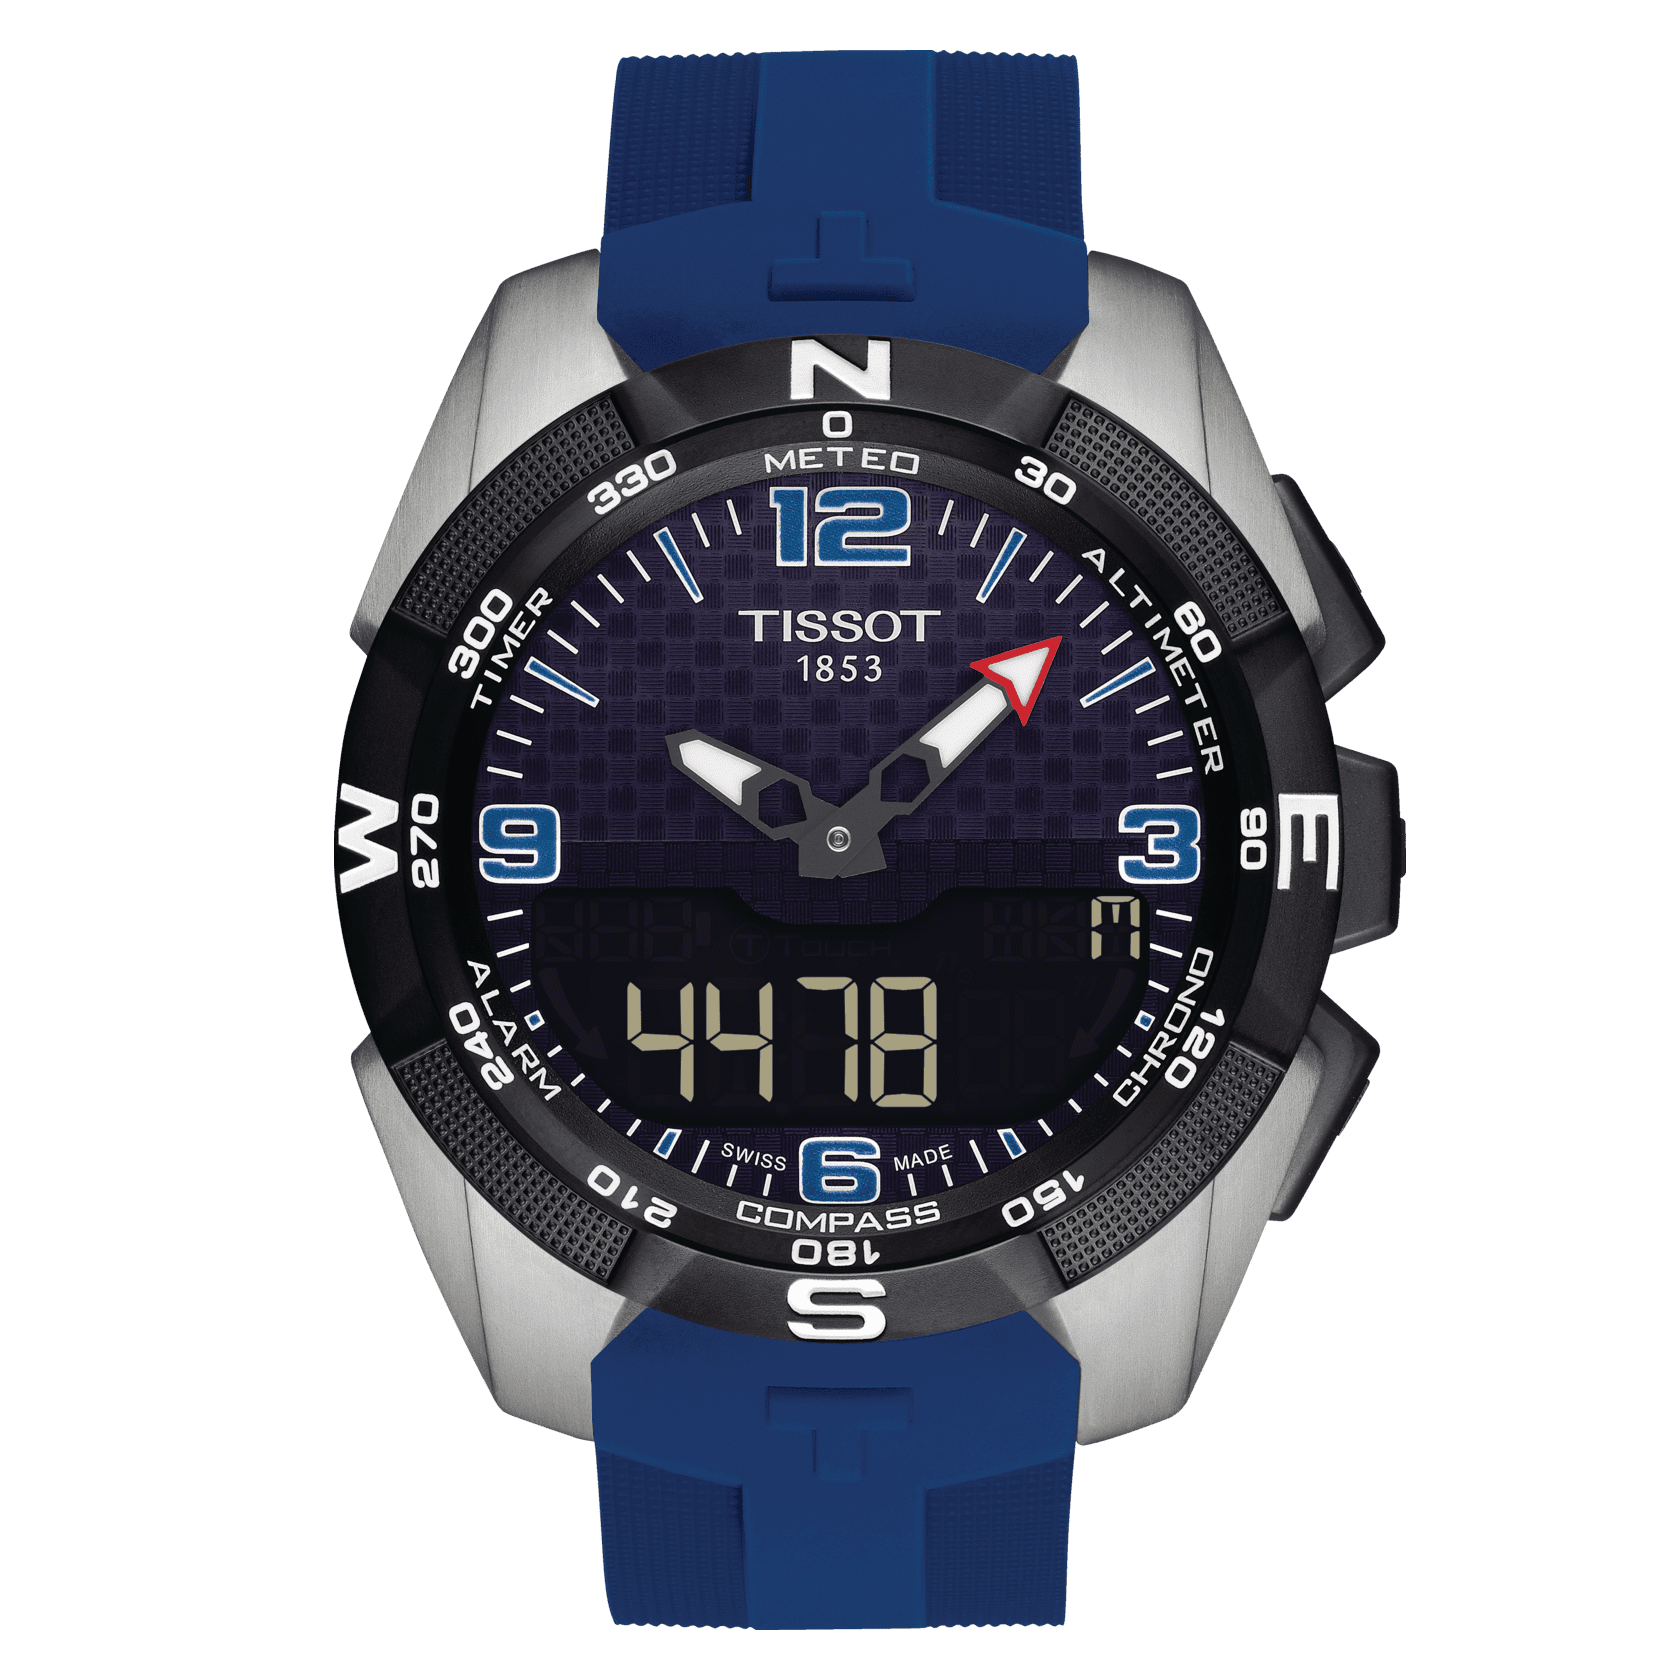 TISSOT T-TOUCH EXPERT SOLAR ICE HOCKEY Quartz (T091.420.47.057.02)
Case                        45mm/Antimagnetic titanium case with black PVD coating
Crystal                      Tactile scratch-resistant sapphire crystal with antireflective coating
Mo